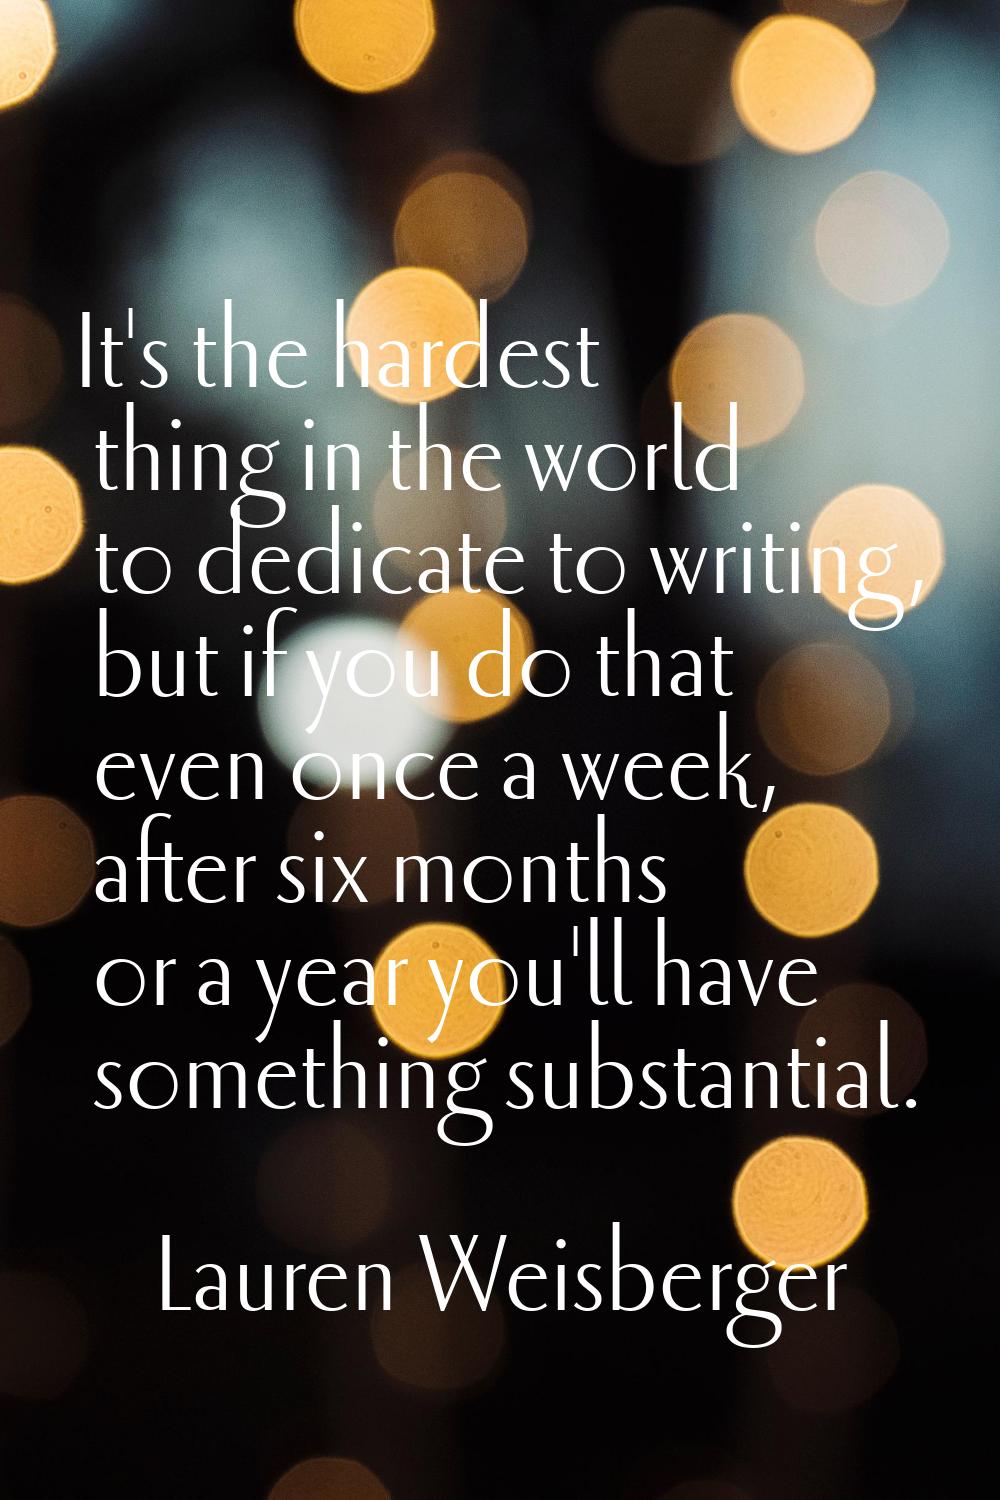 It's the hardest thing in the world to dedicate to writing, but if you do that even once a week, af